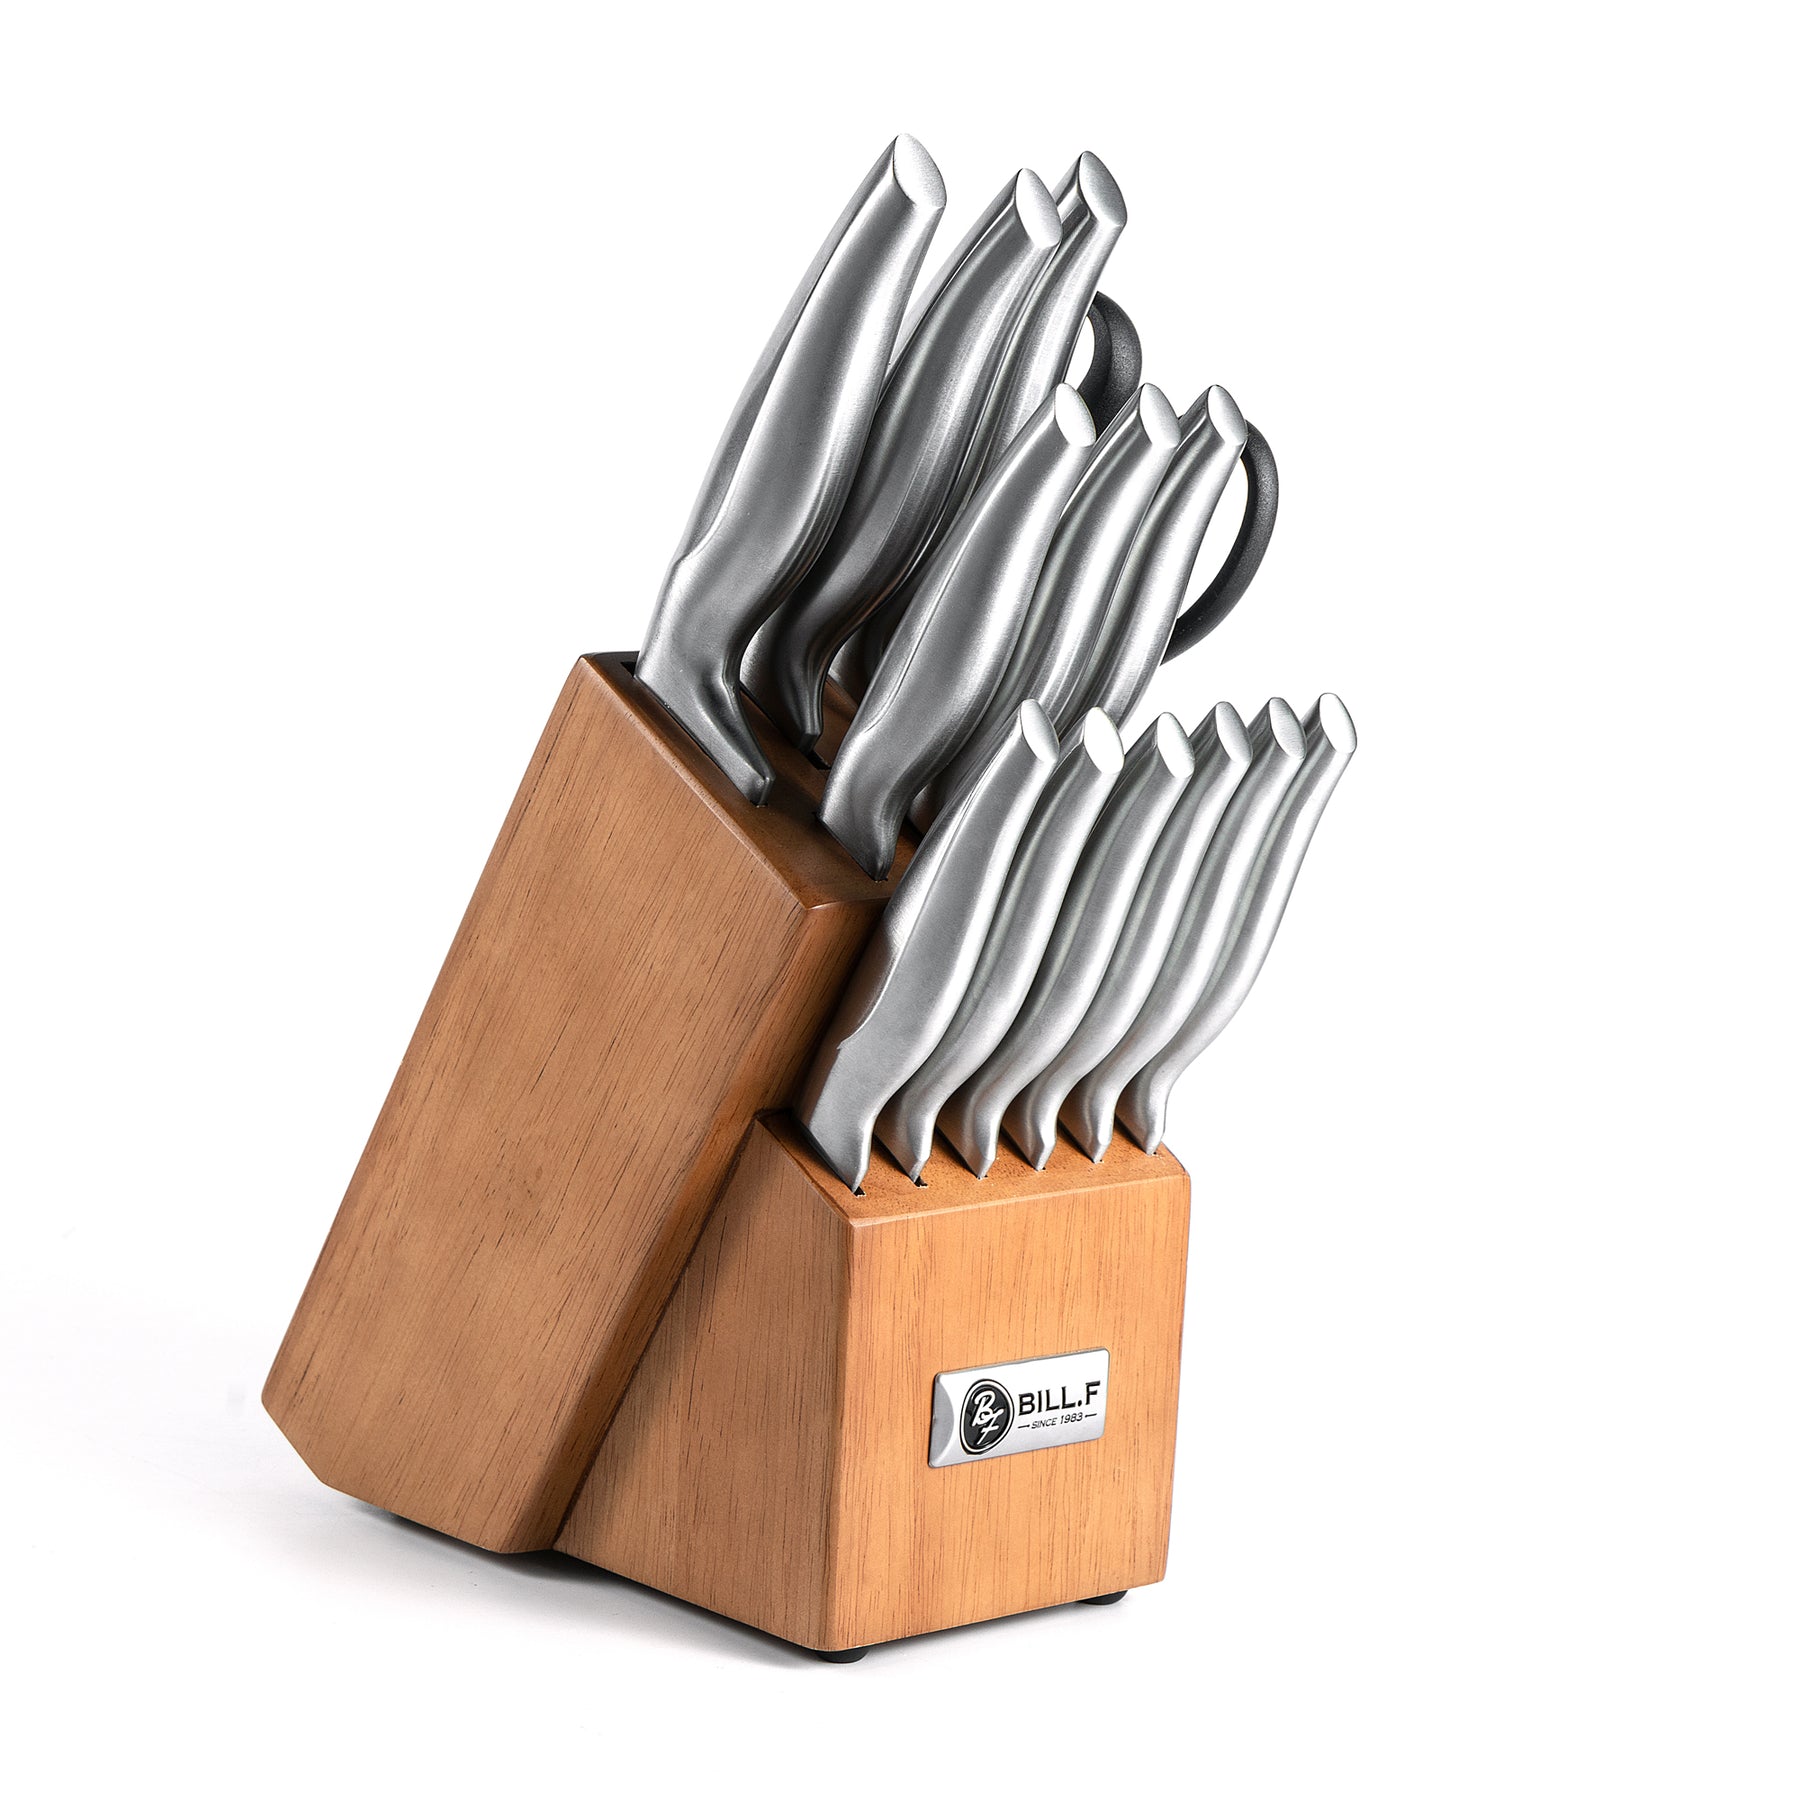 CuCut Knife Set, 16 Pieces Kitchen Knives Set with Steel Block, Dishwasher  Safe, German Stainless Steel Knife Block Set with Knife Sharpener, Elegant